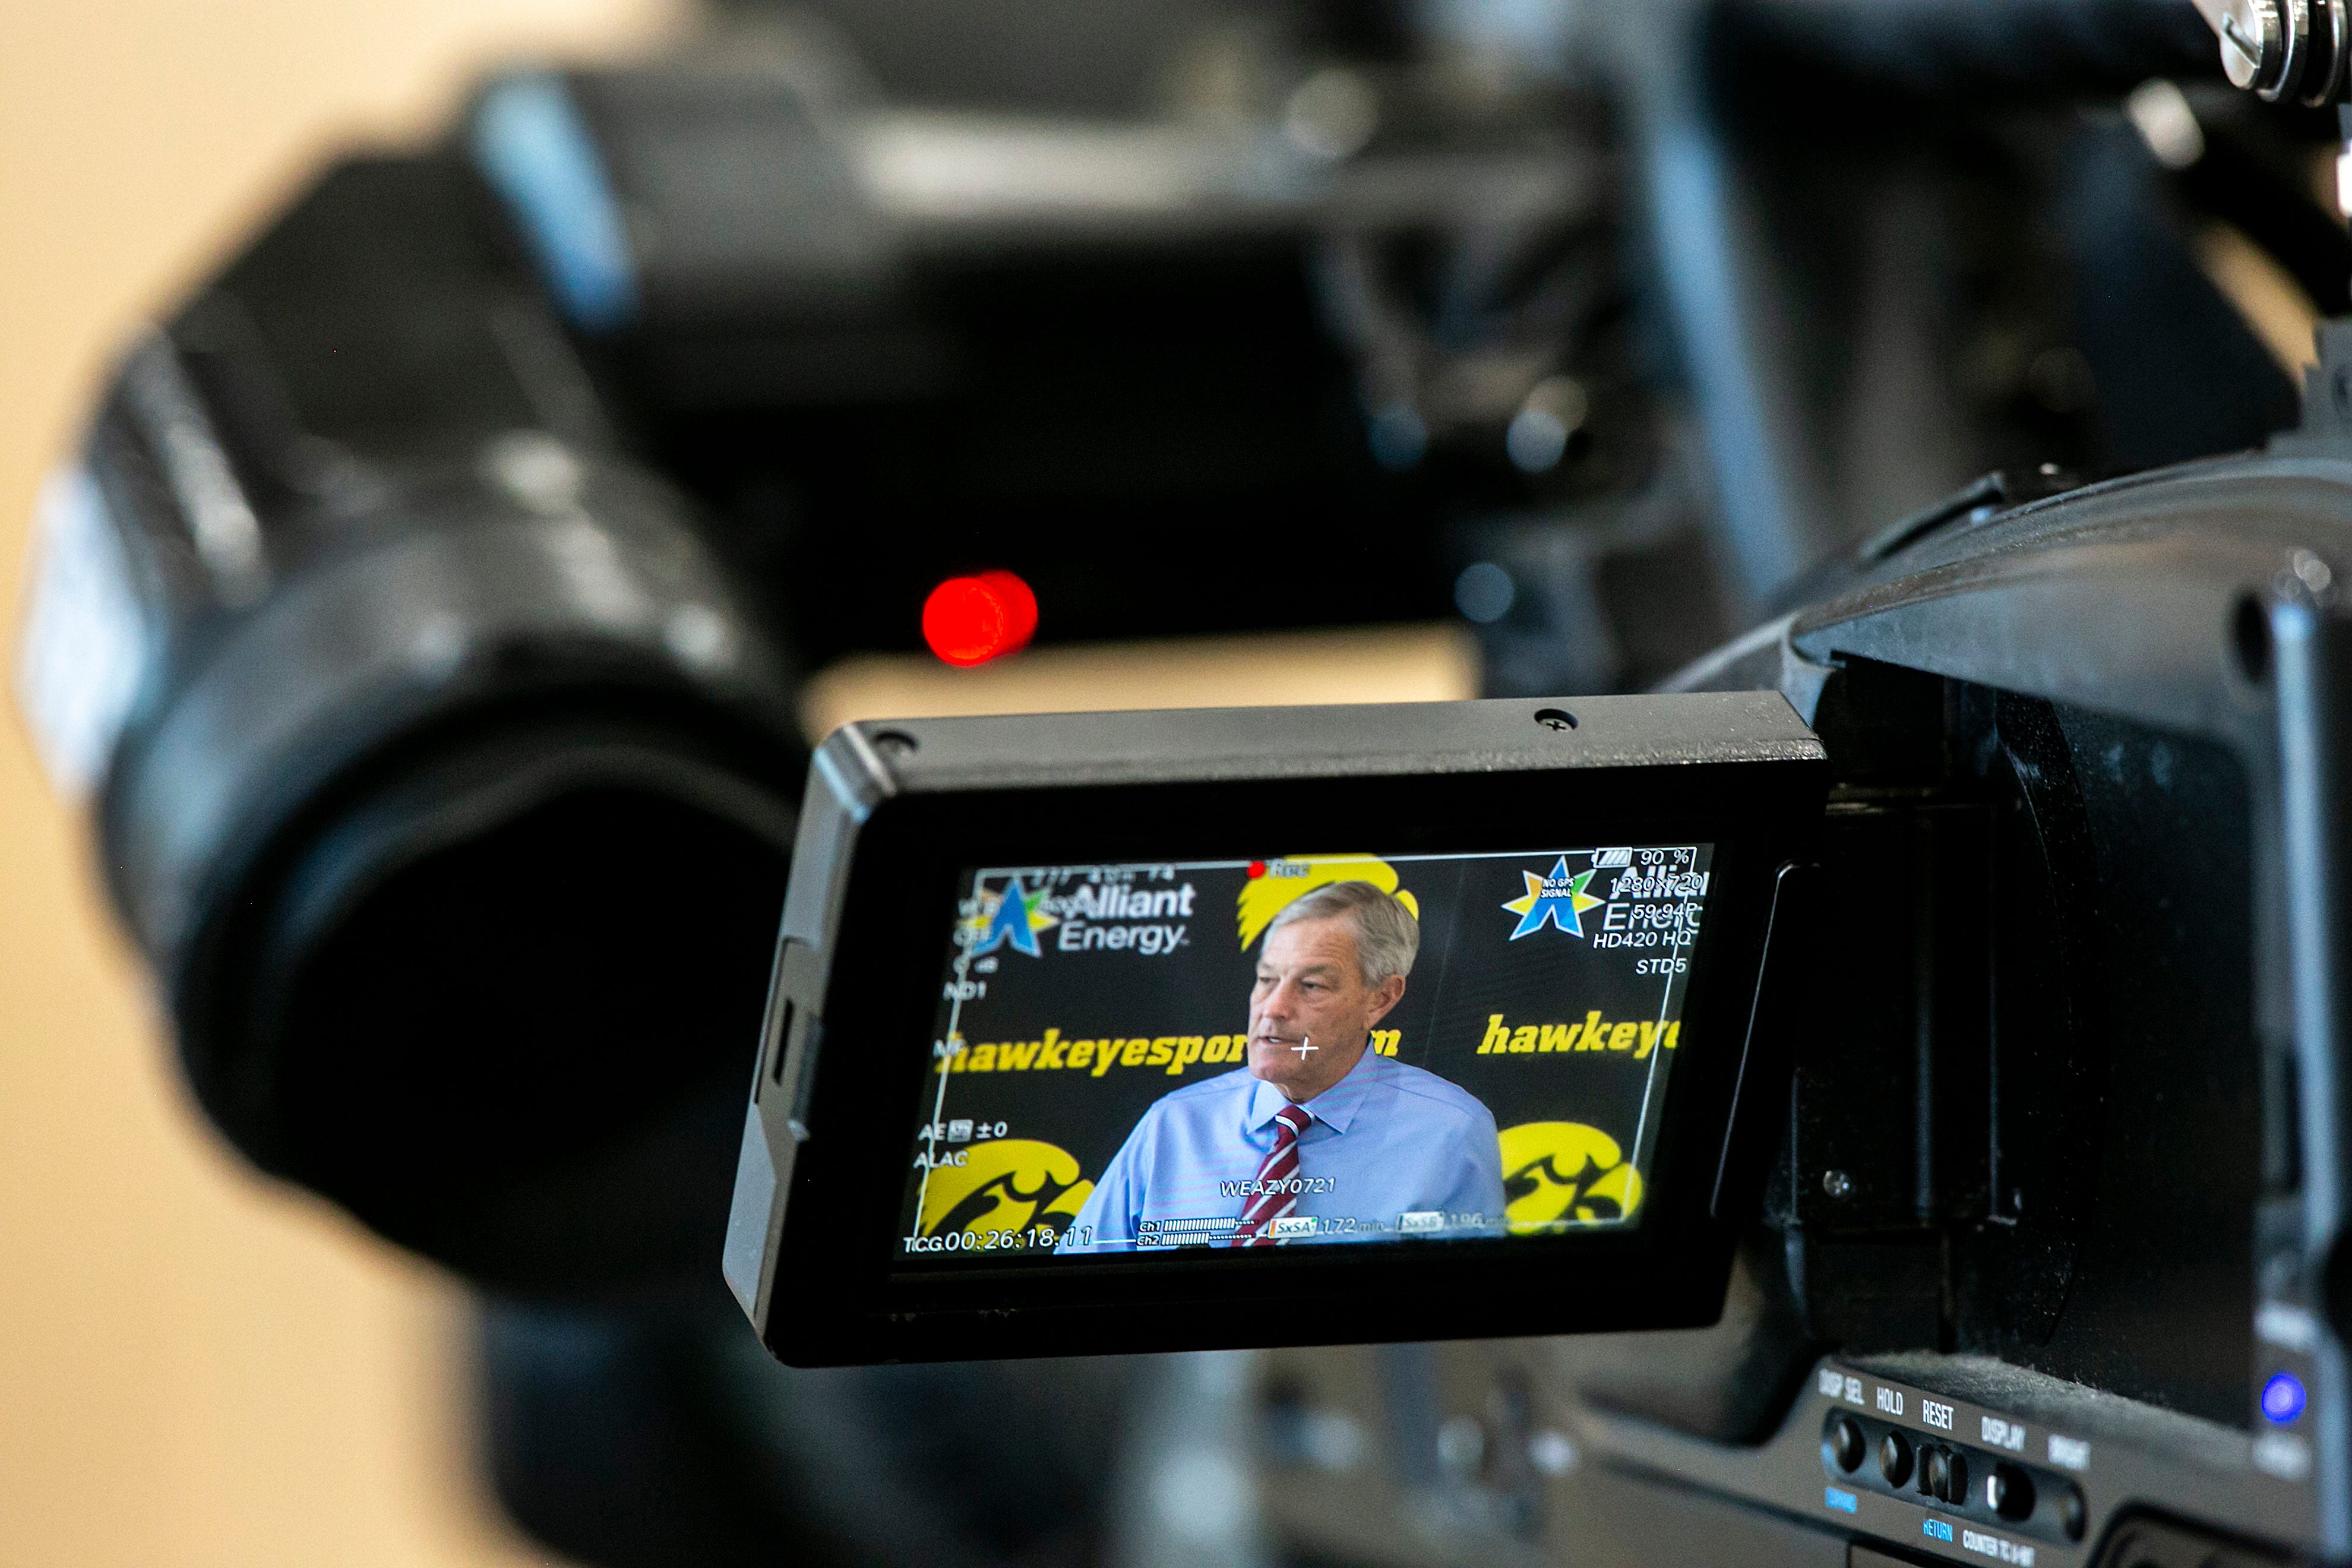 Iowa head coach Kirk Ferentz speaks to reporters during a news conference ahead of the Big Ten Championship football game, Tuesday, Nov. 30, 2021, at the Hansen Football Performance Center in Iowa City, Iowa.